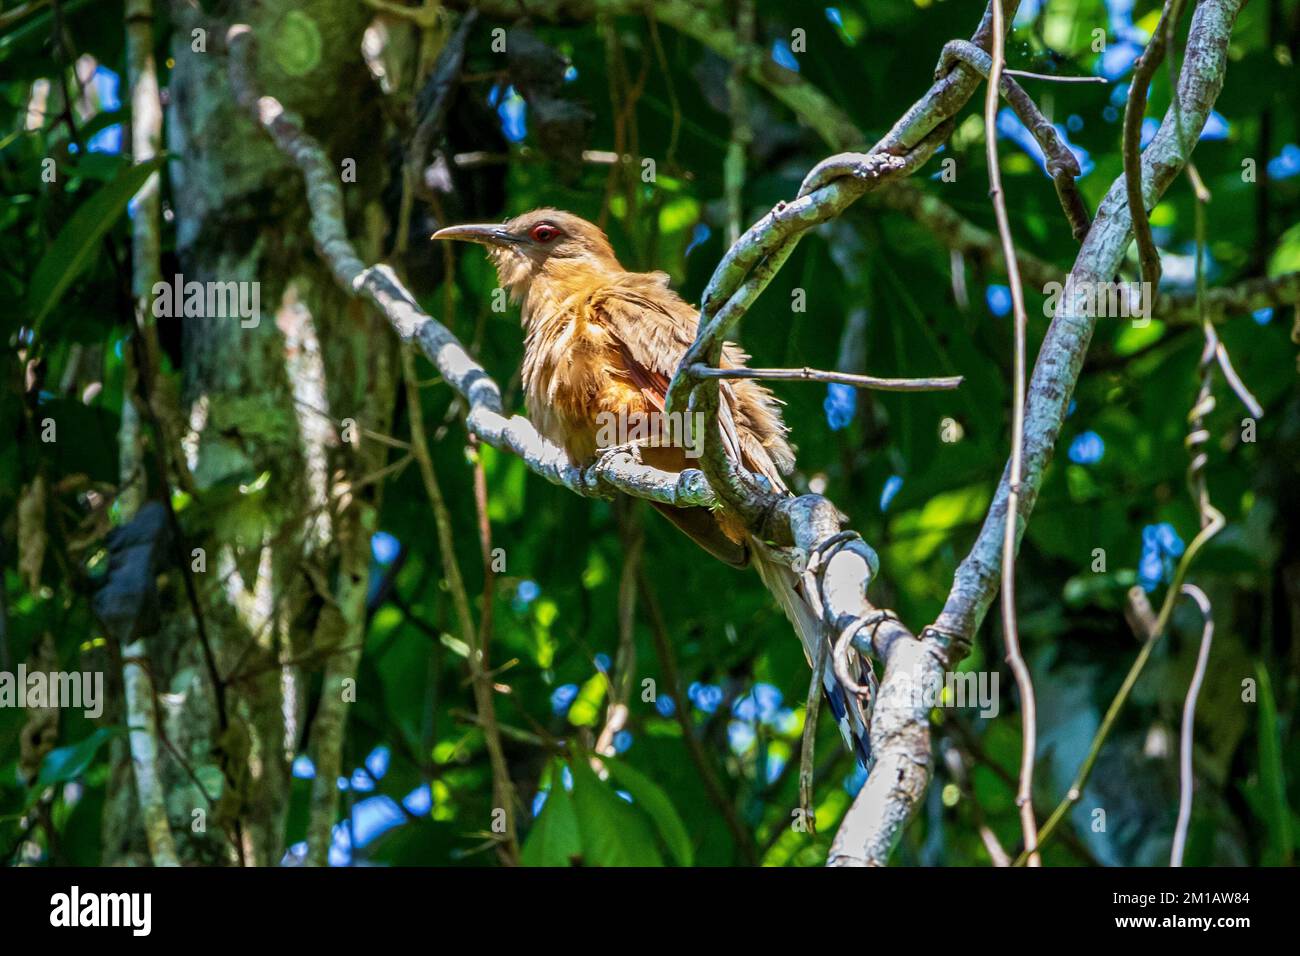 A Great Lizard-Cuckoo bird perching on tree branch with leaves in the garden Stock Photo